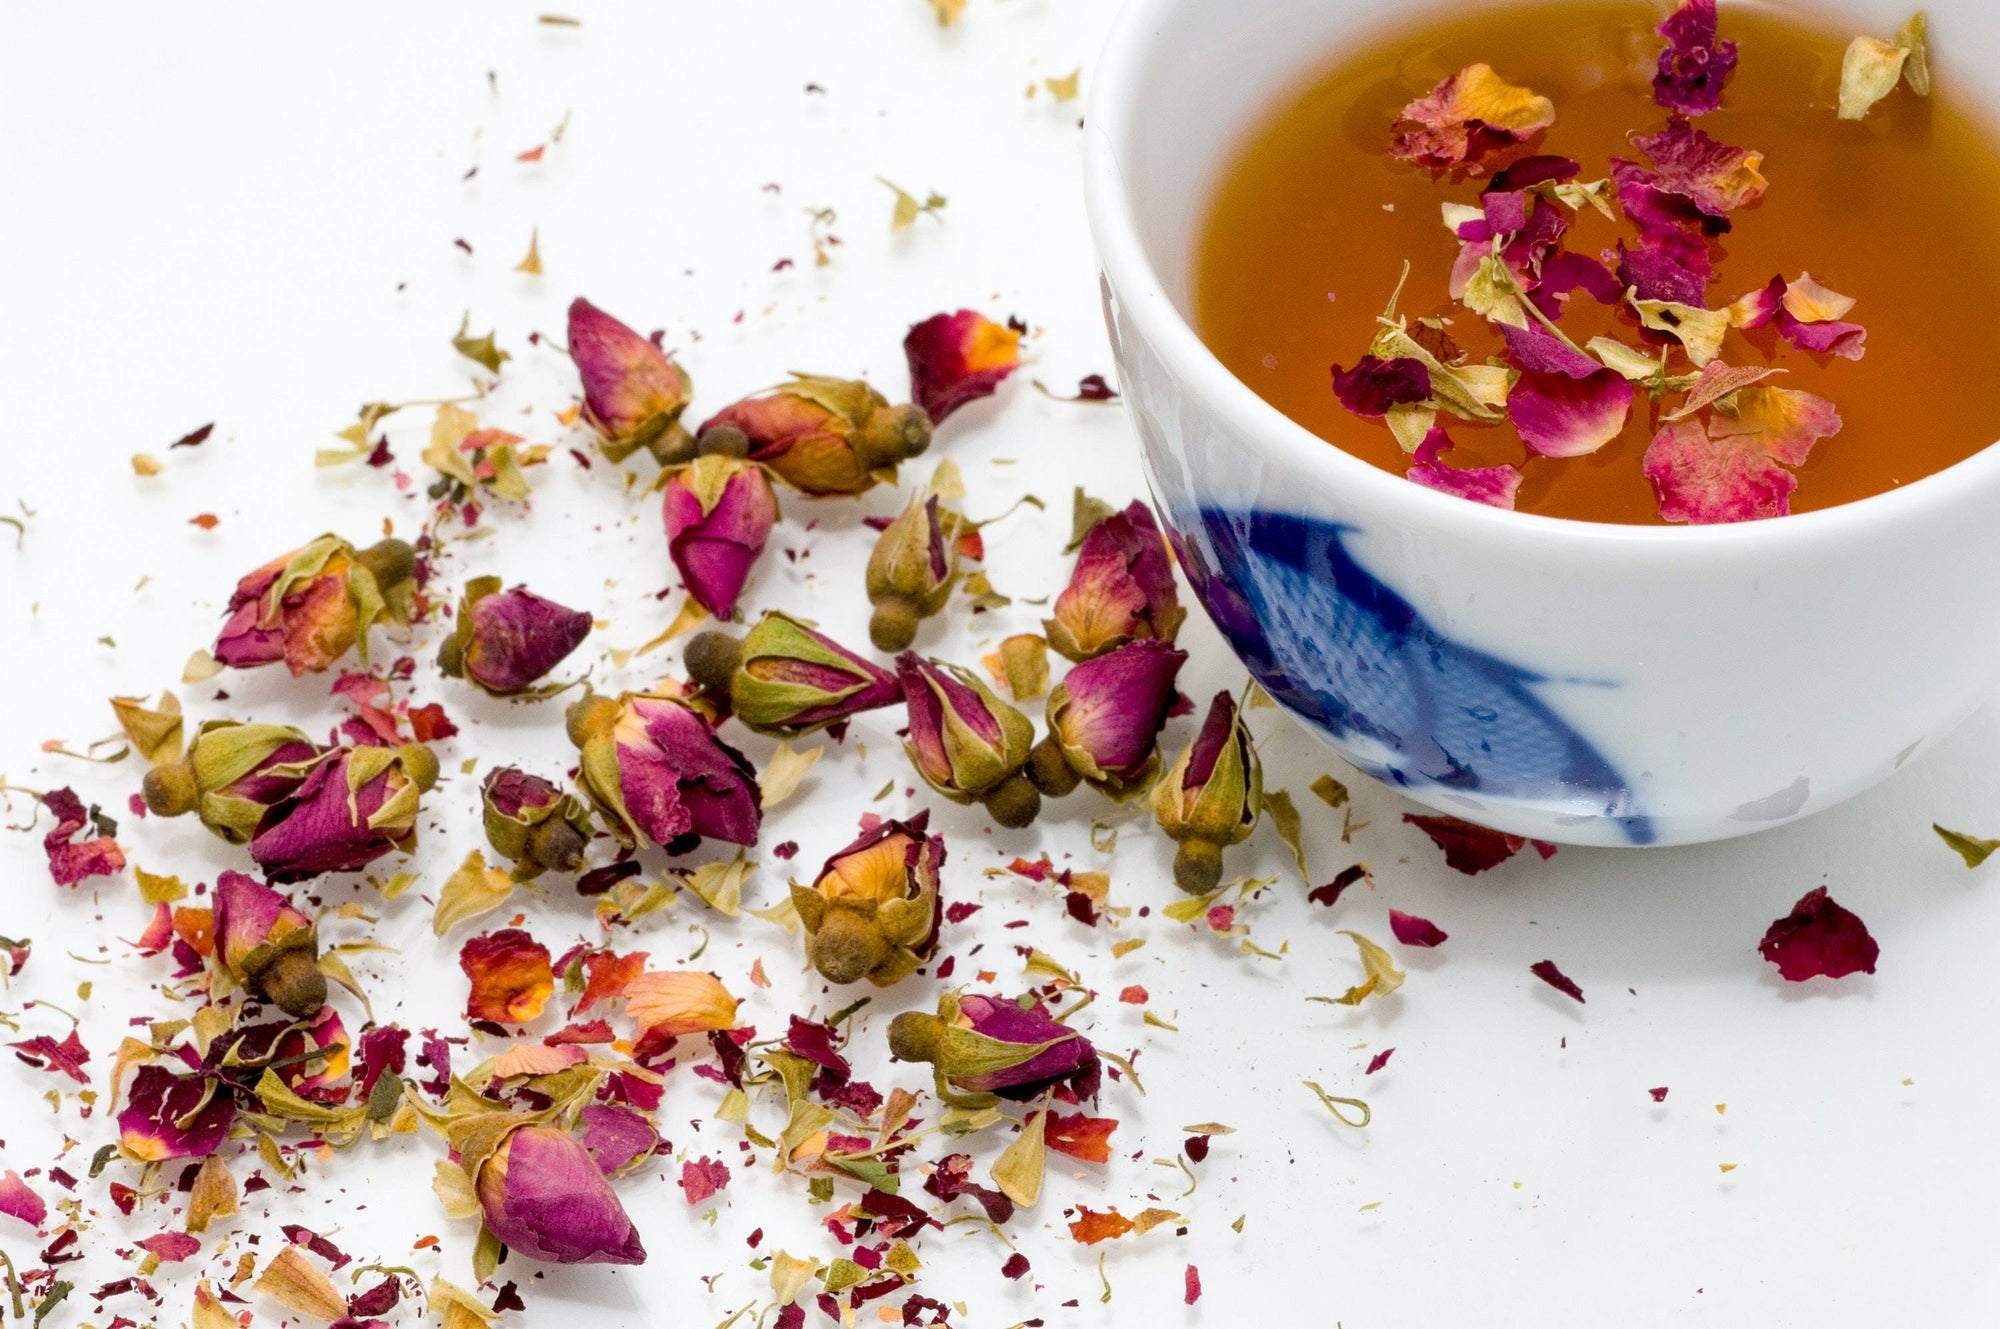 Find a Wellness Tea Just for You